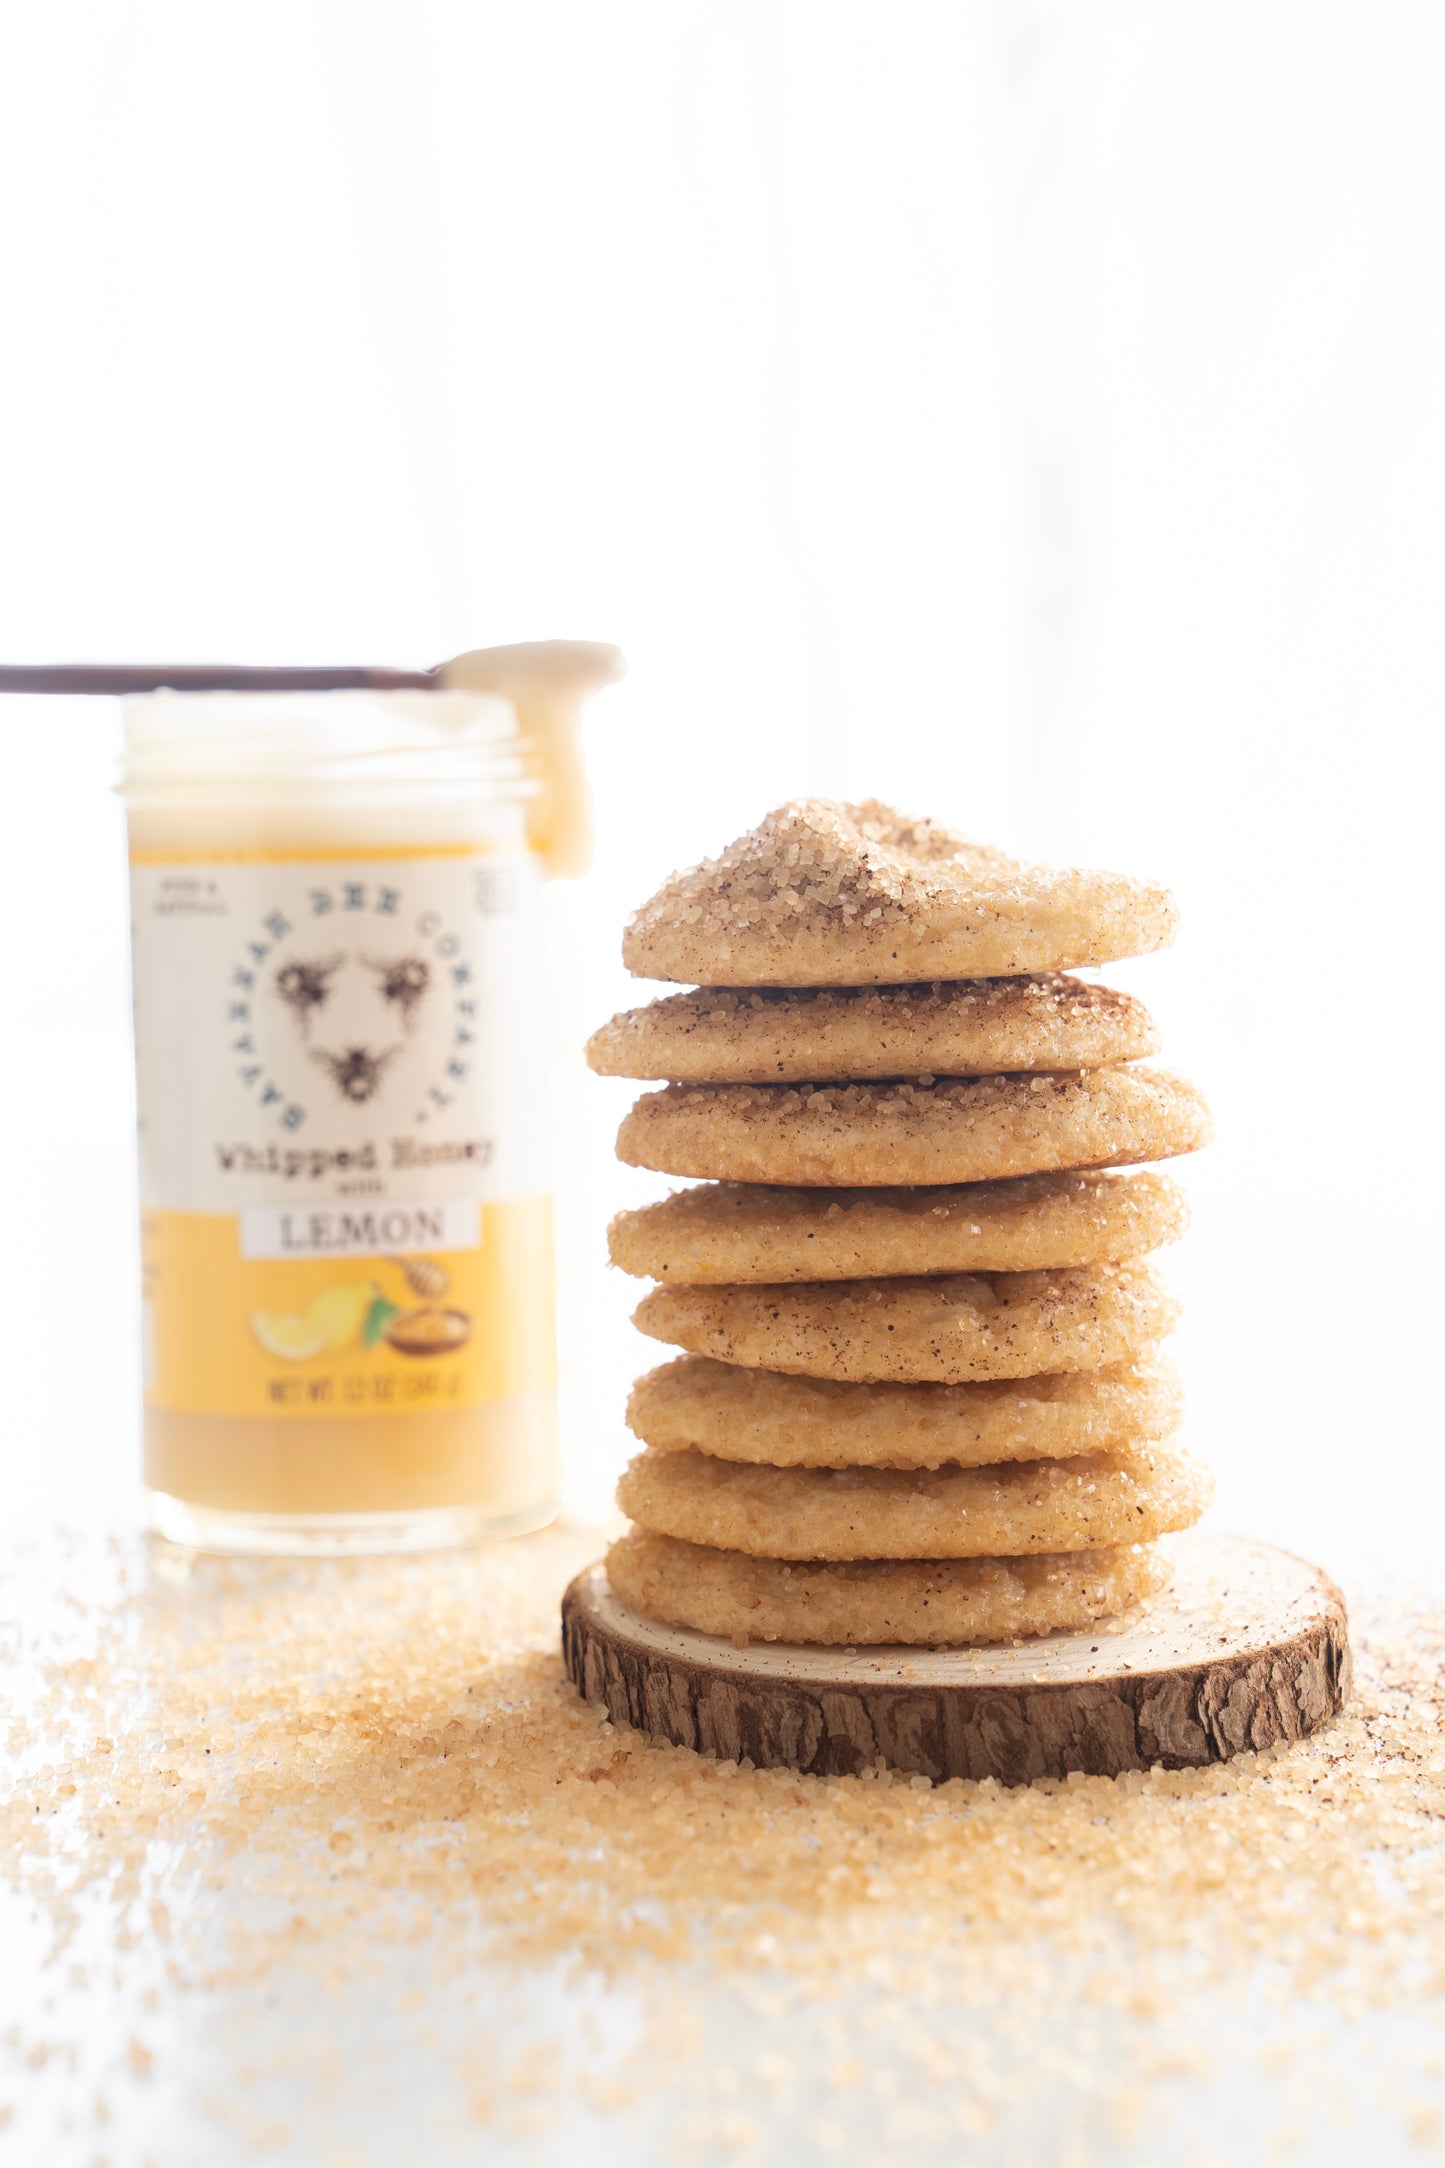 A stack of lemon clove cookies next to a jar of whipped honey with lemon.